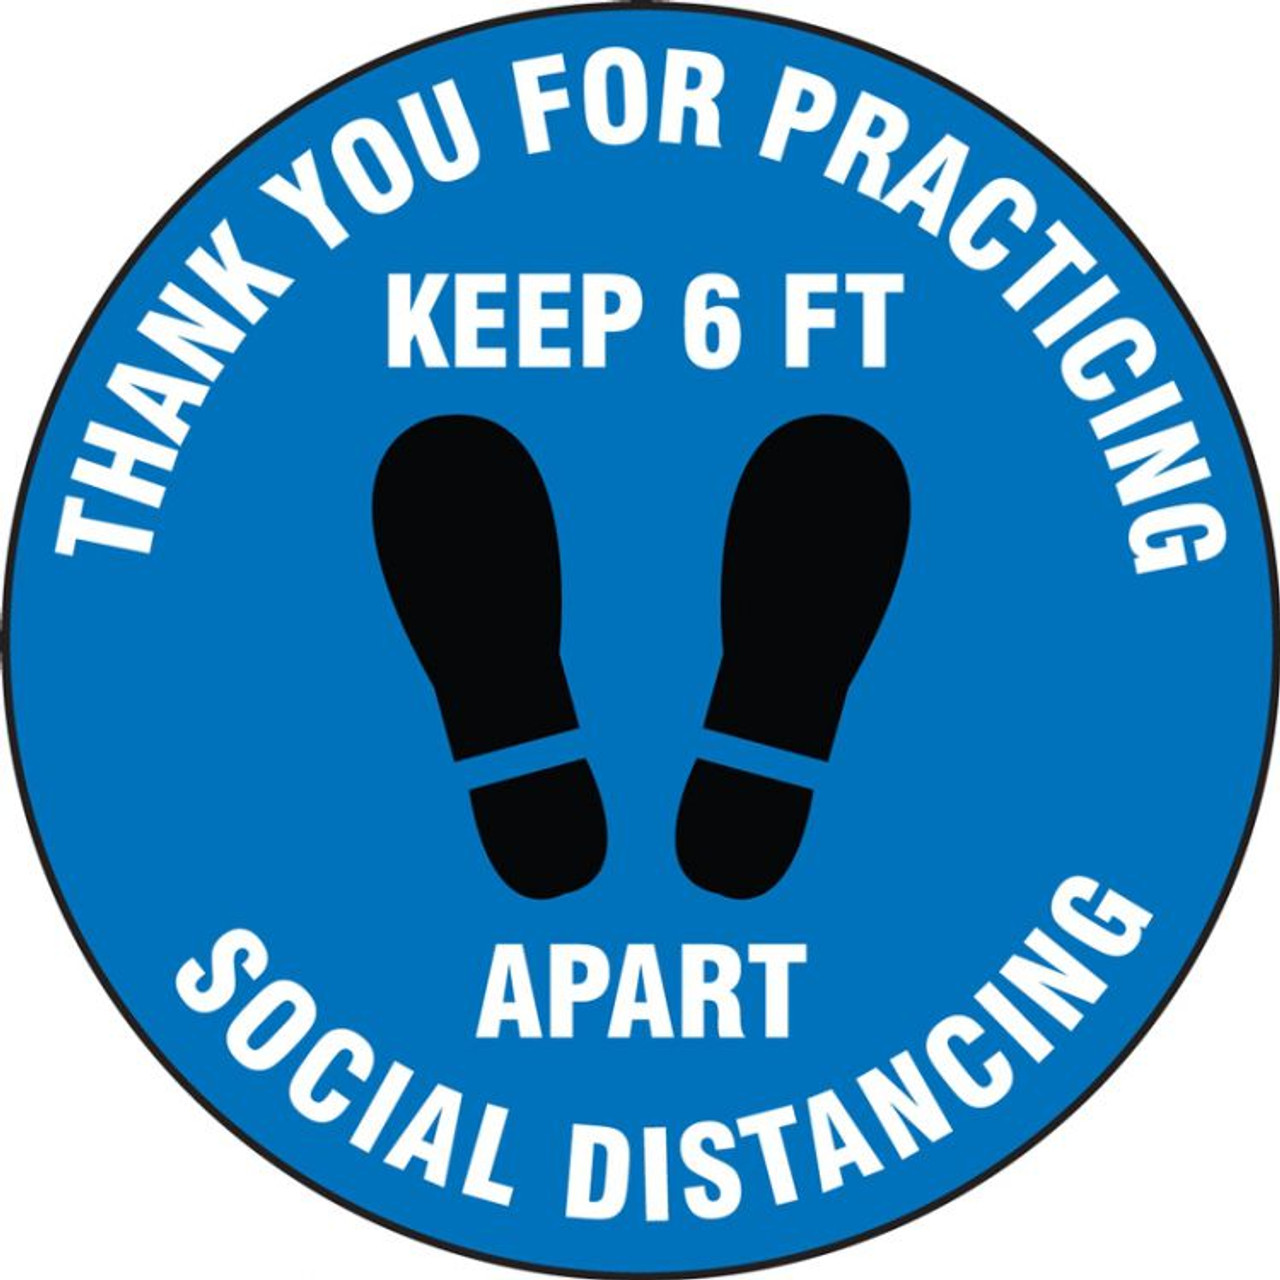 Safety Label, Thank You For Practicing Social Distancing Keep 6 FT Apart, Adhesive Vinyl, 4", 5/PK